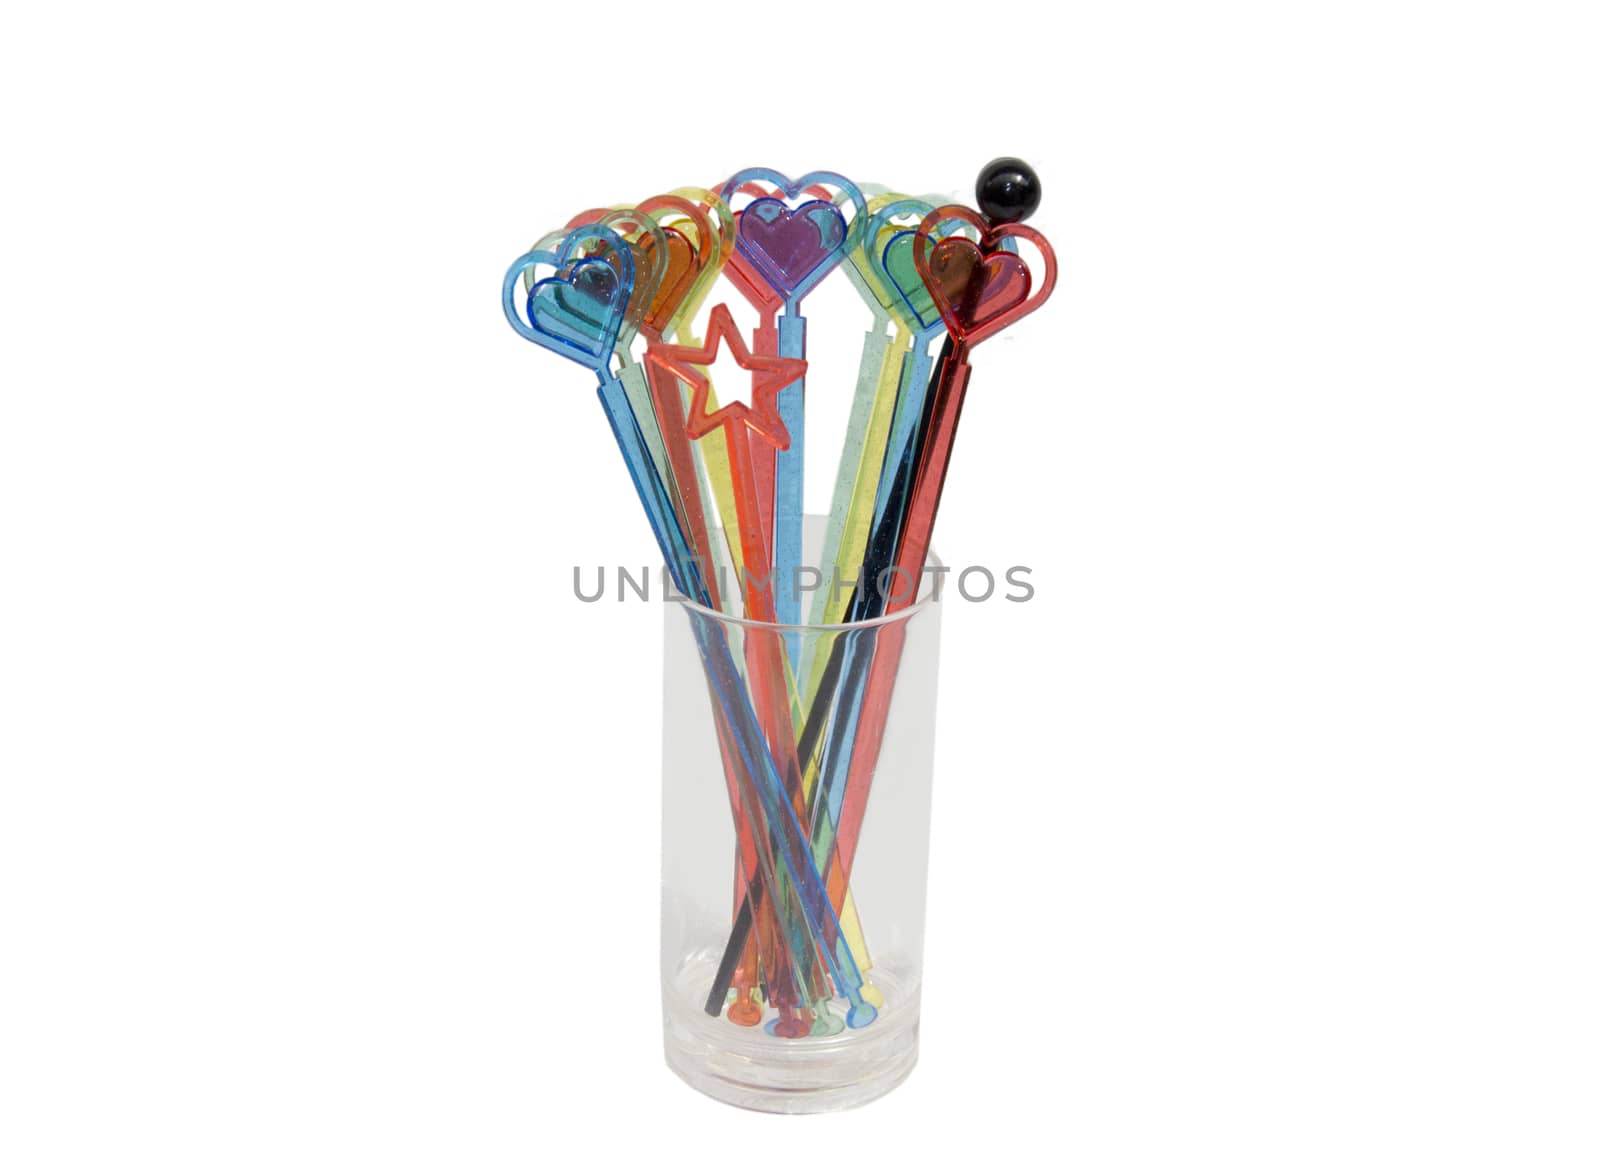 Drink stirrers in a glass